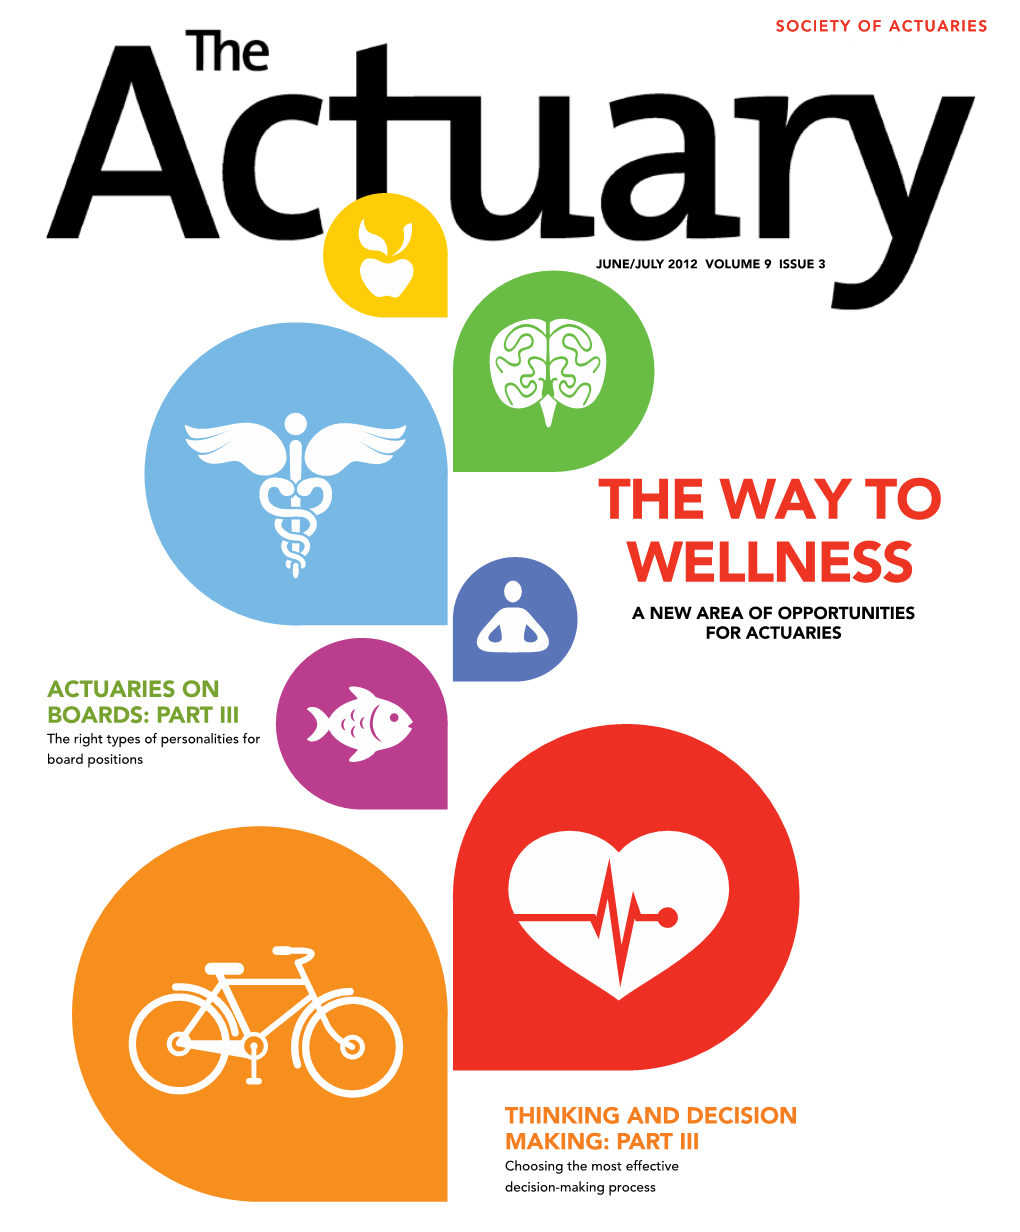 The Way to Wellness a New Area of Opportunities for Actuaries